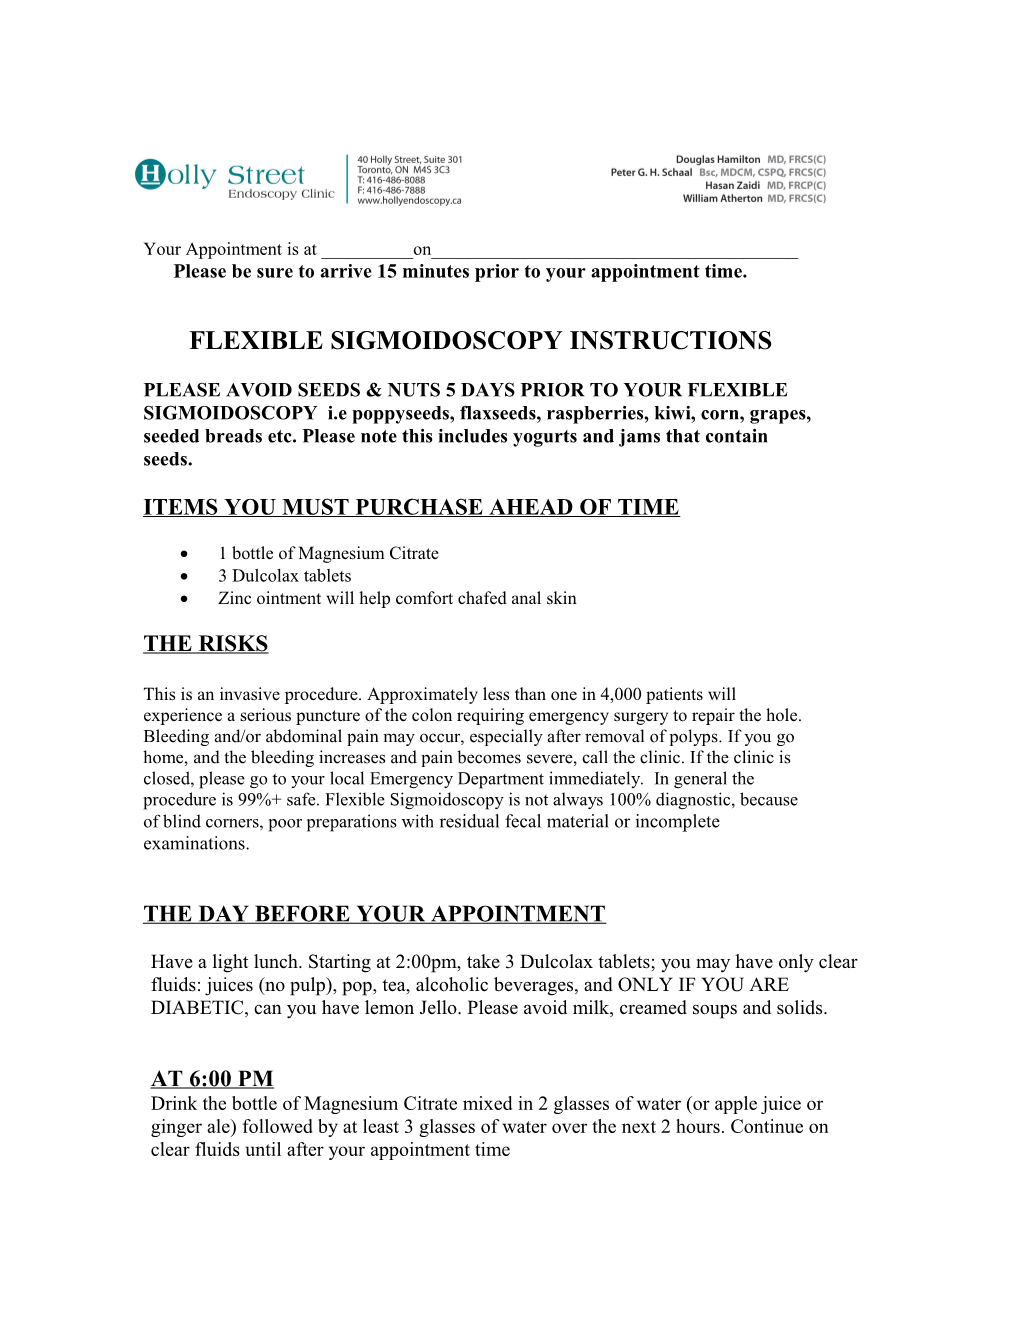 What to Do Before Your Flexible Sigmoidoscopy